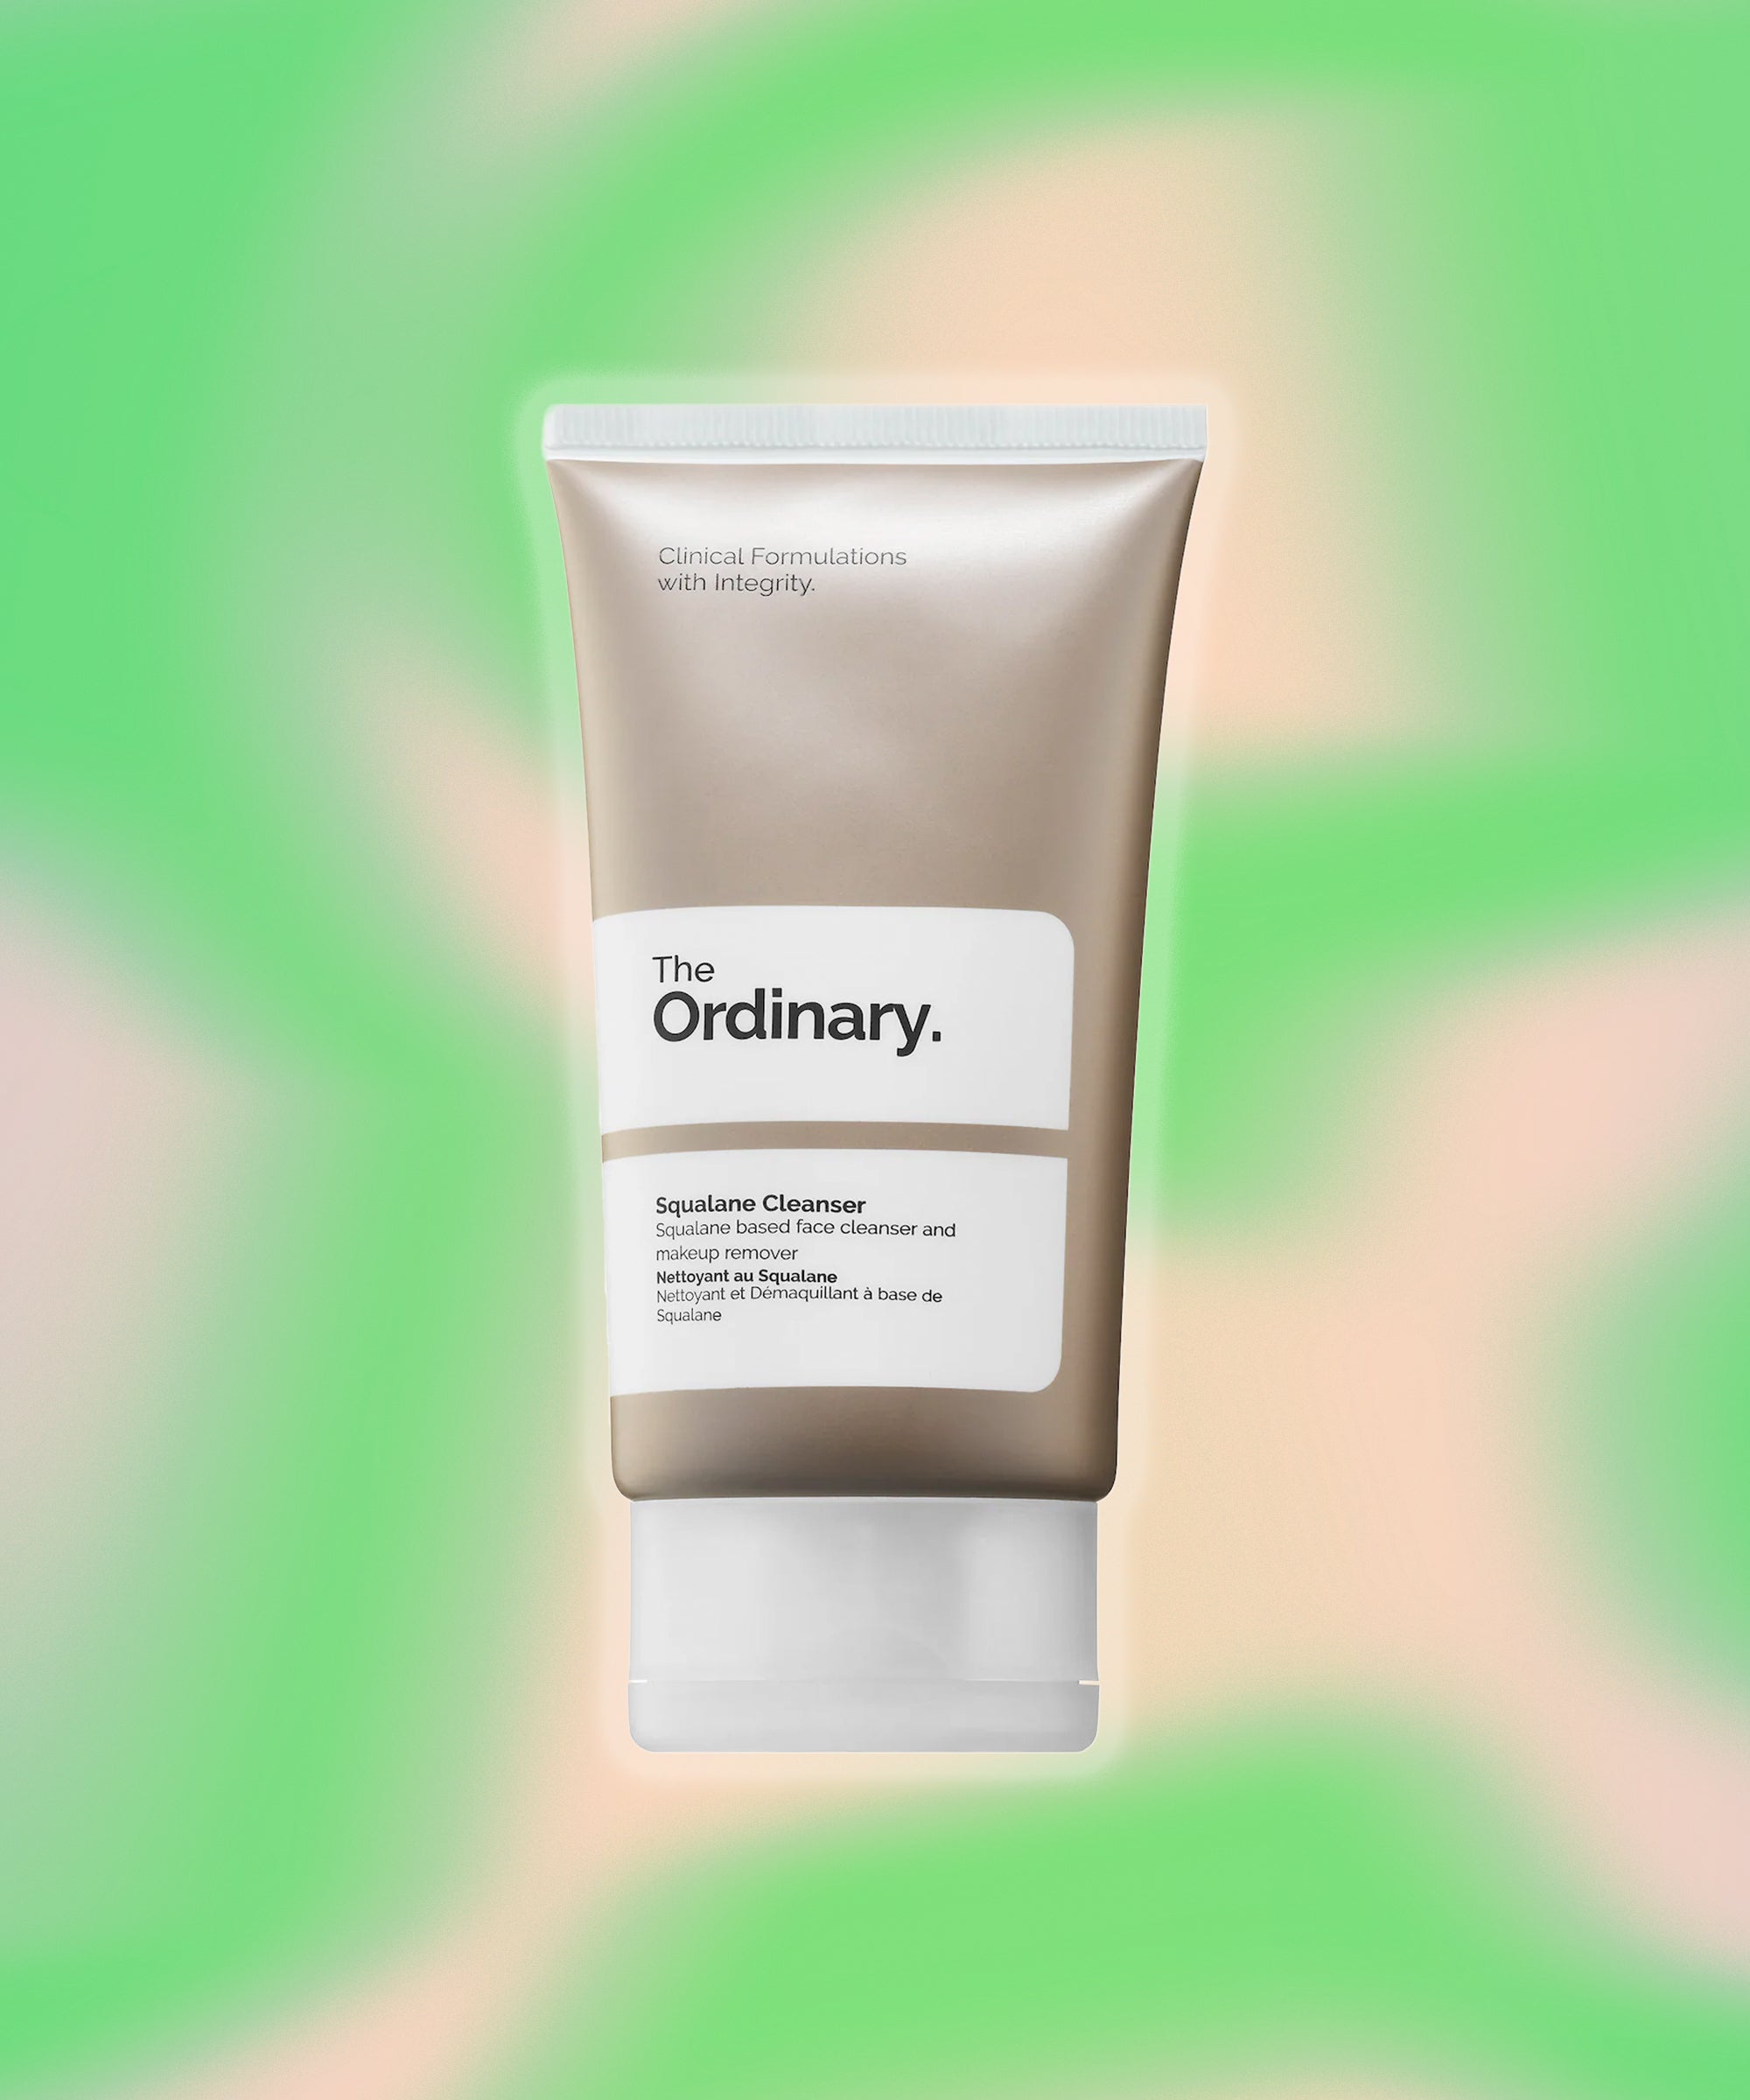 Your Guide to the NEW The Ordinary Haircare Range! 